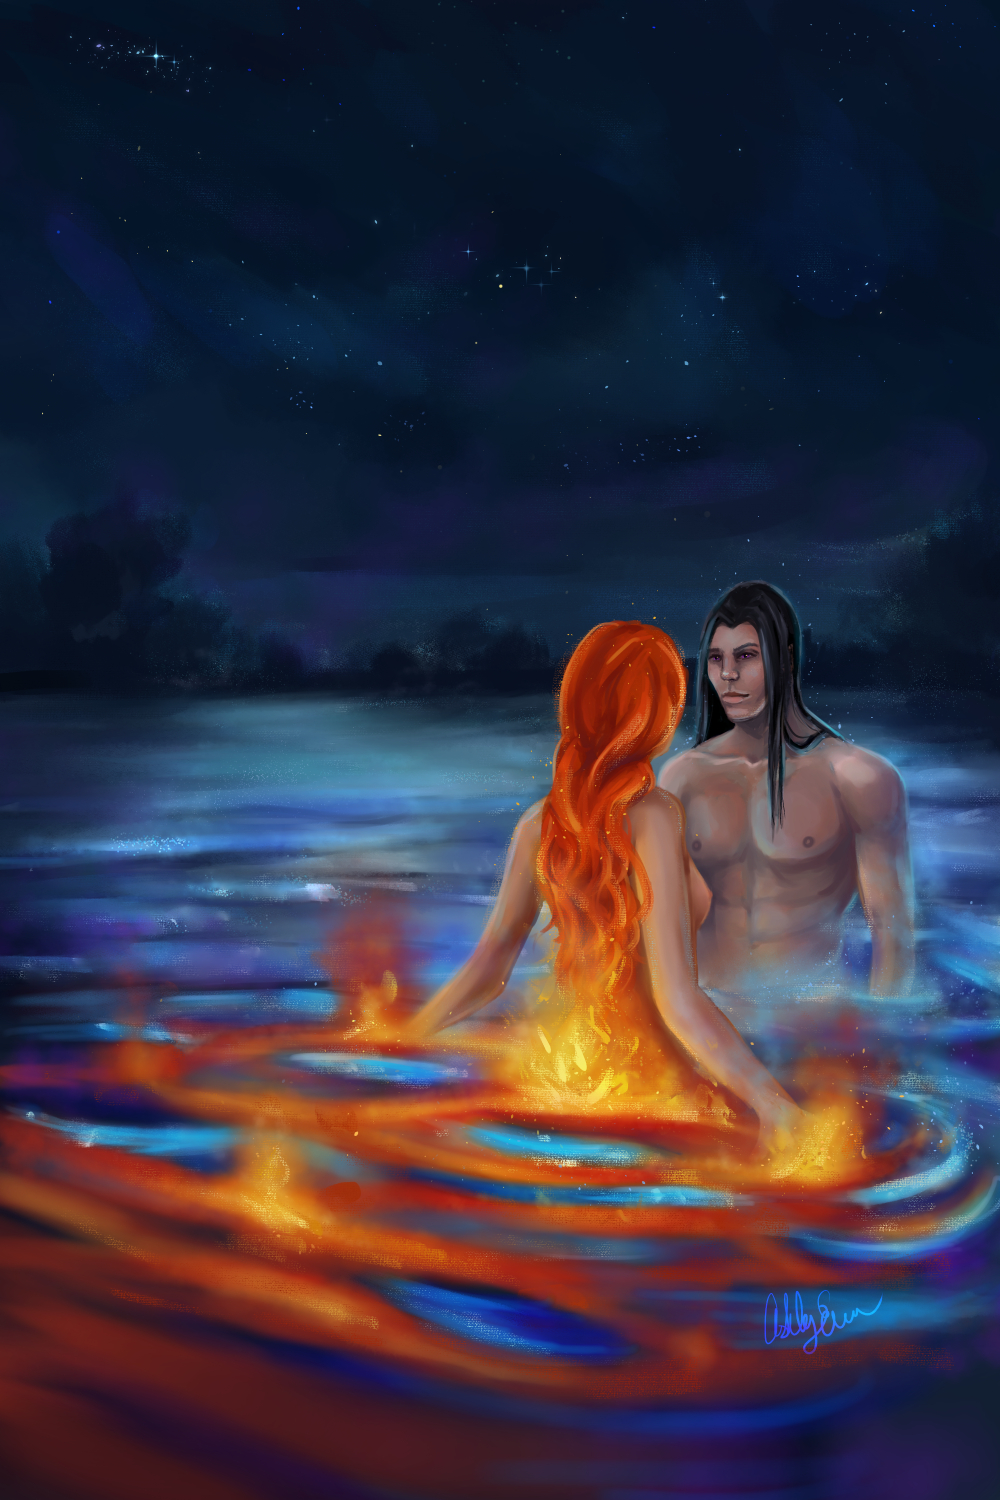 A man and woman swimming in an icy lake at night, but there's fire spreading through the lake, looking like it originates from the woman's hands